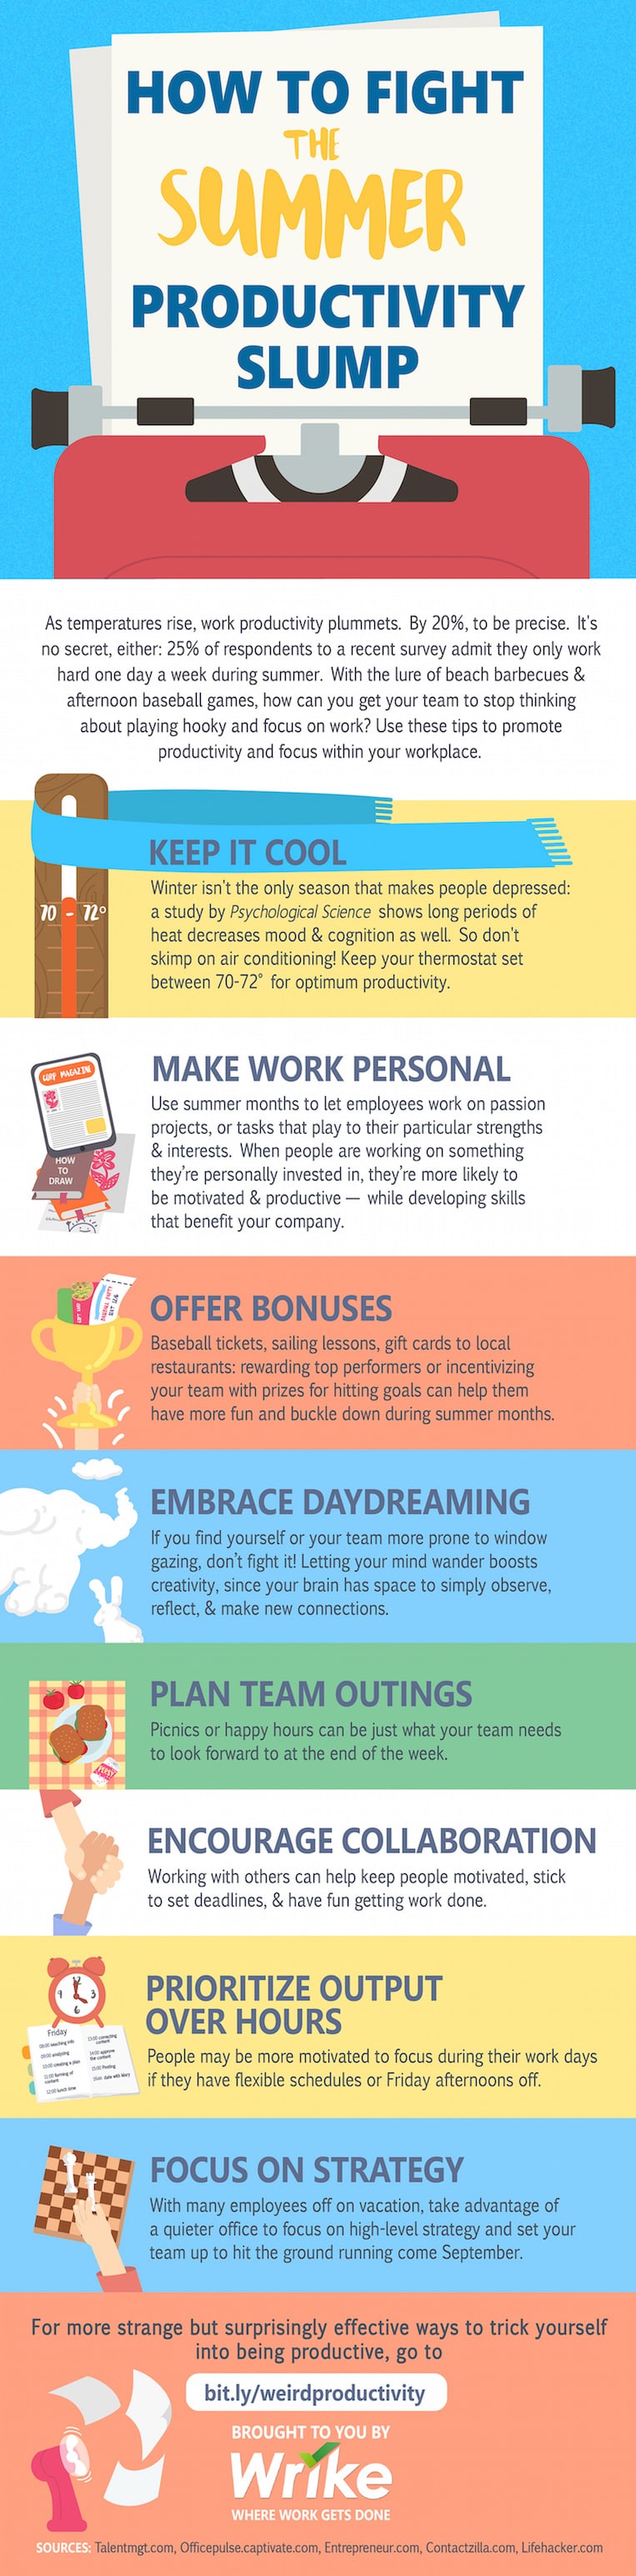 8 Tips to Fight the Summer Productivity Slump (#Infographic)